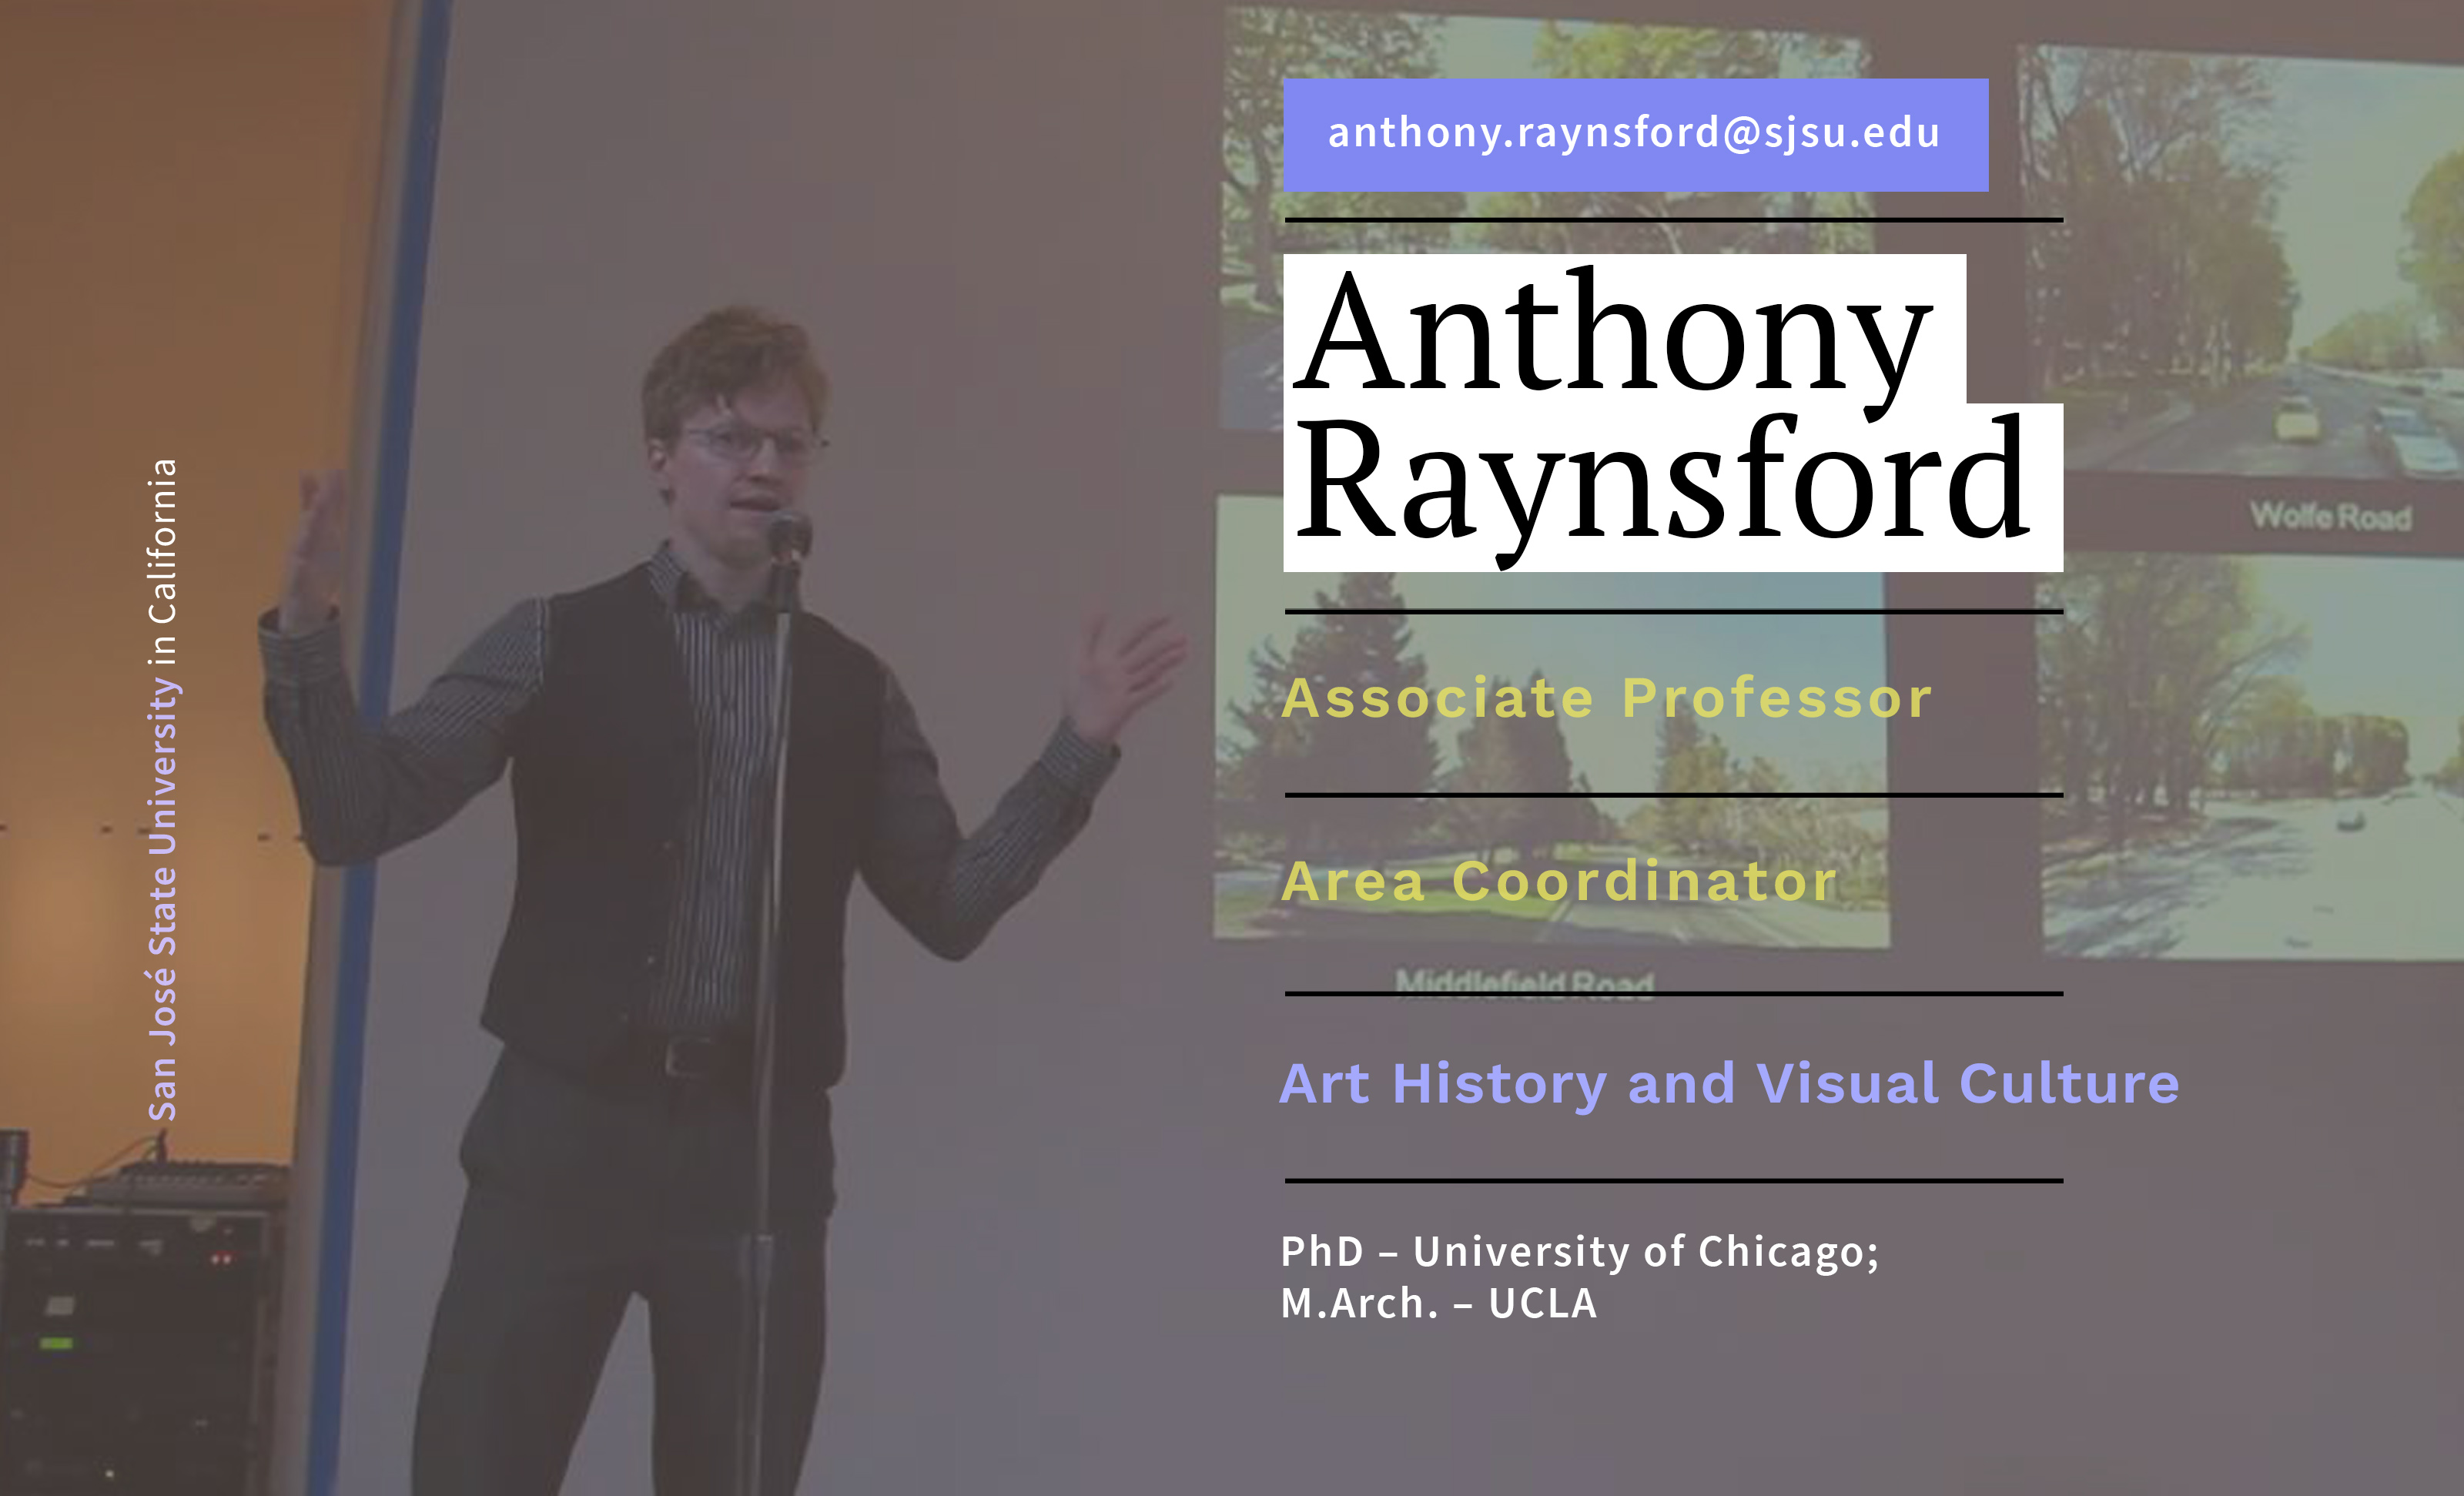 Anthony presenting to an audience